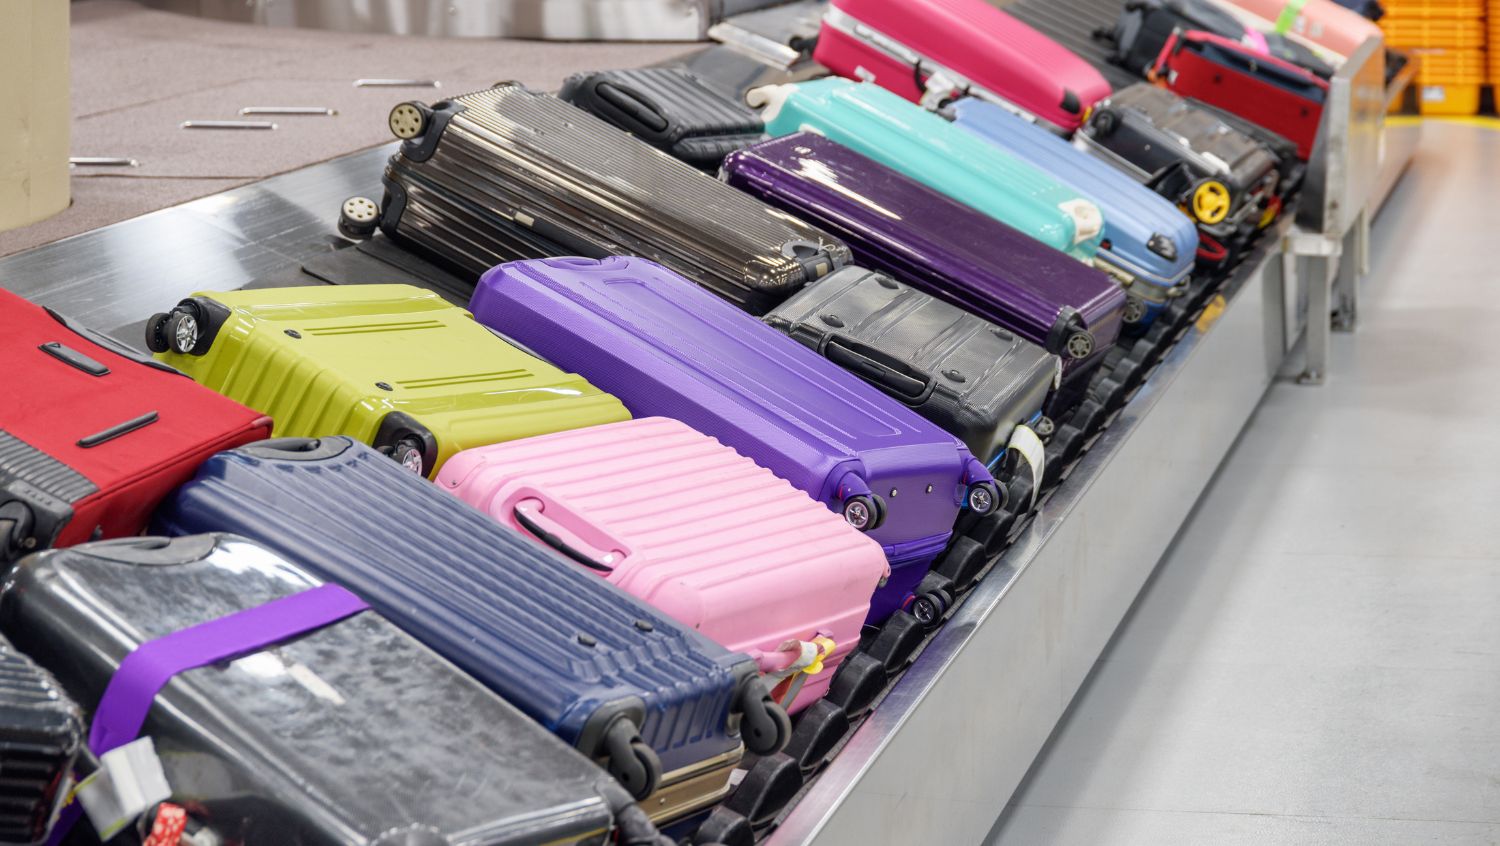 One of the best checked baggage tips is illustrated in this image of multicolored suitcases on a luggage carousel.